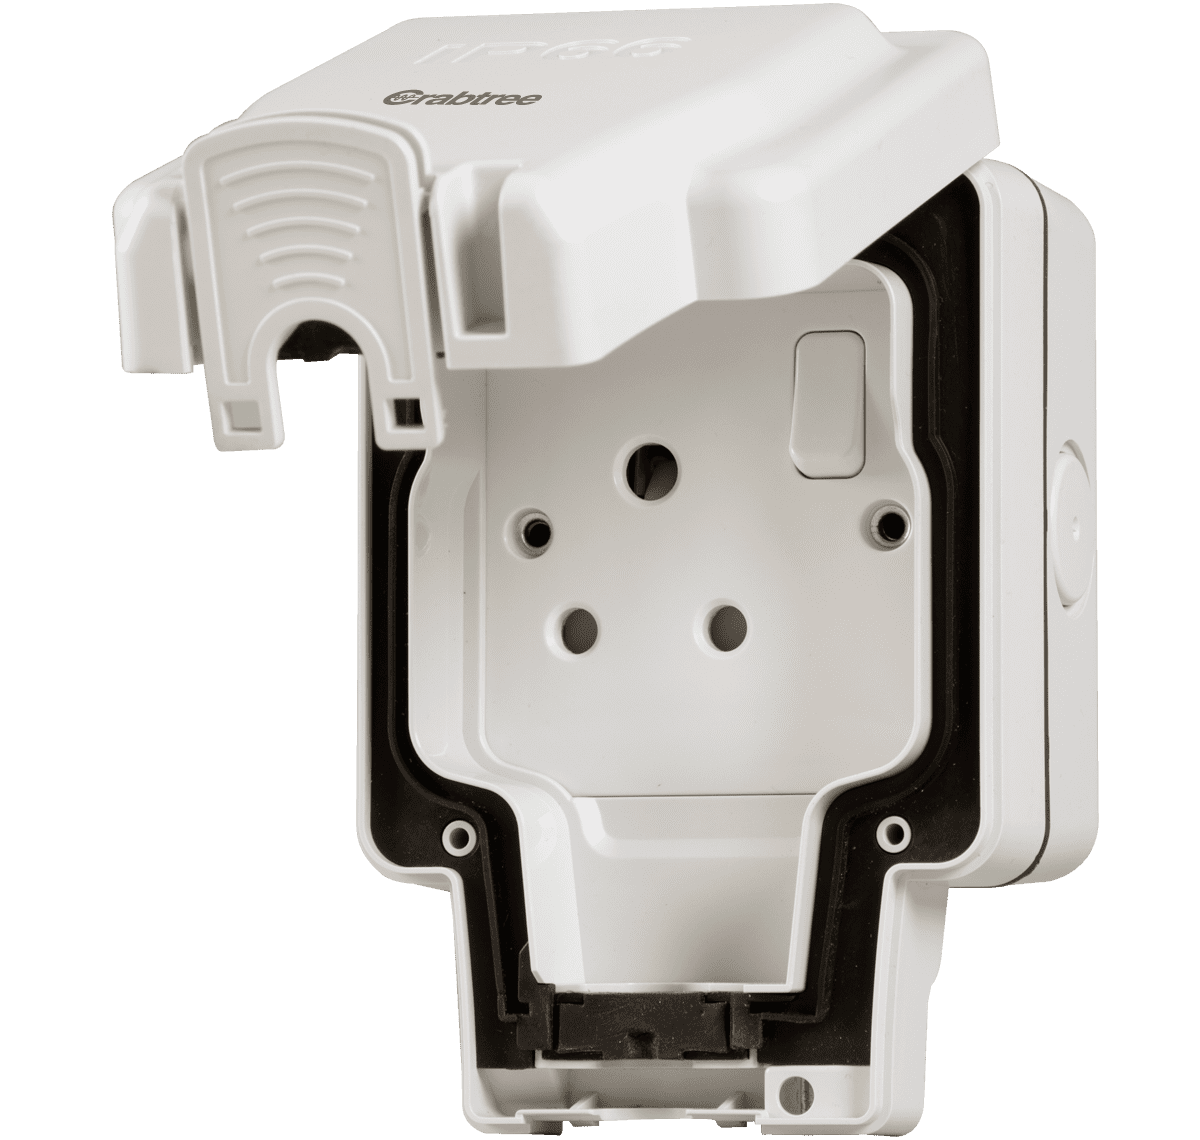 Crabtree - 16 A Switched Socket IP66